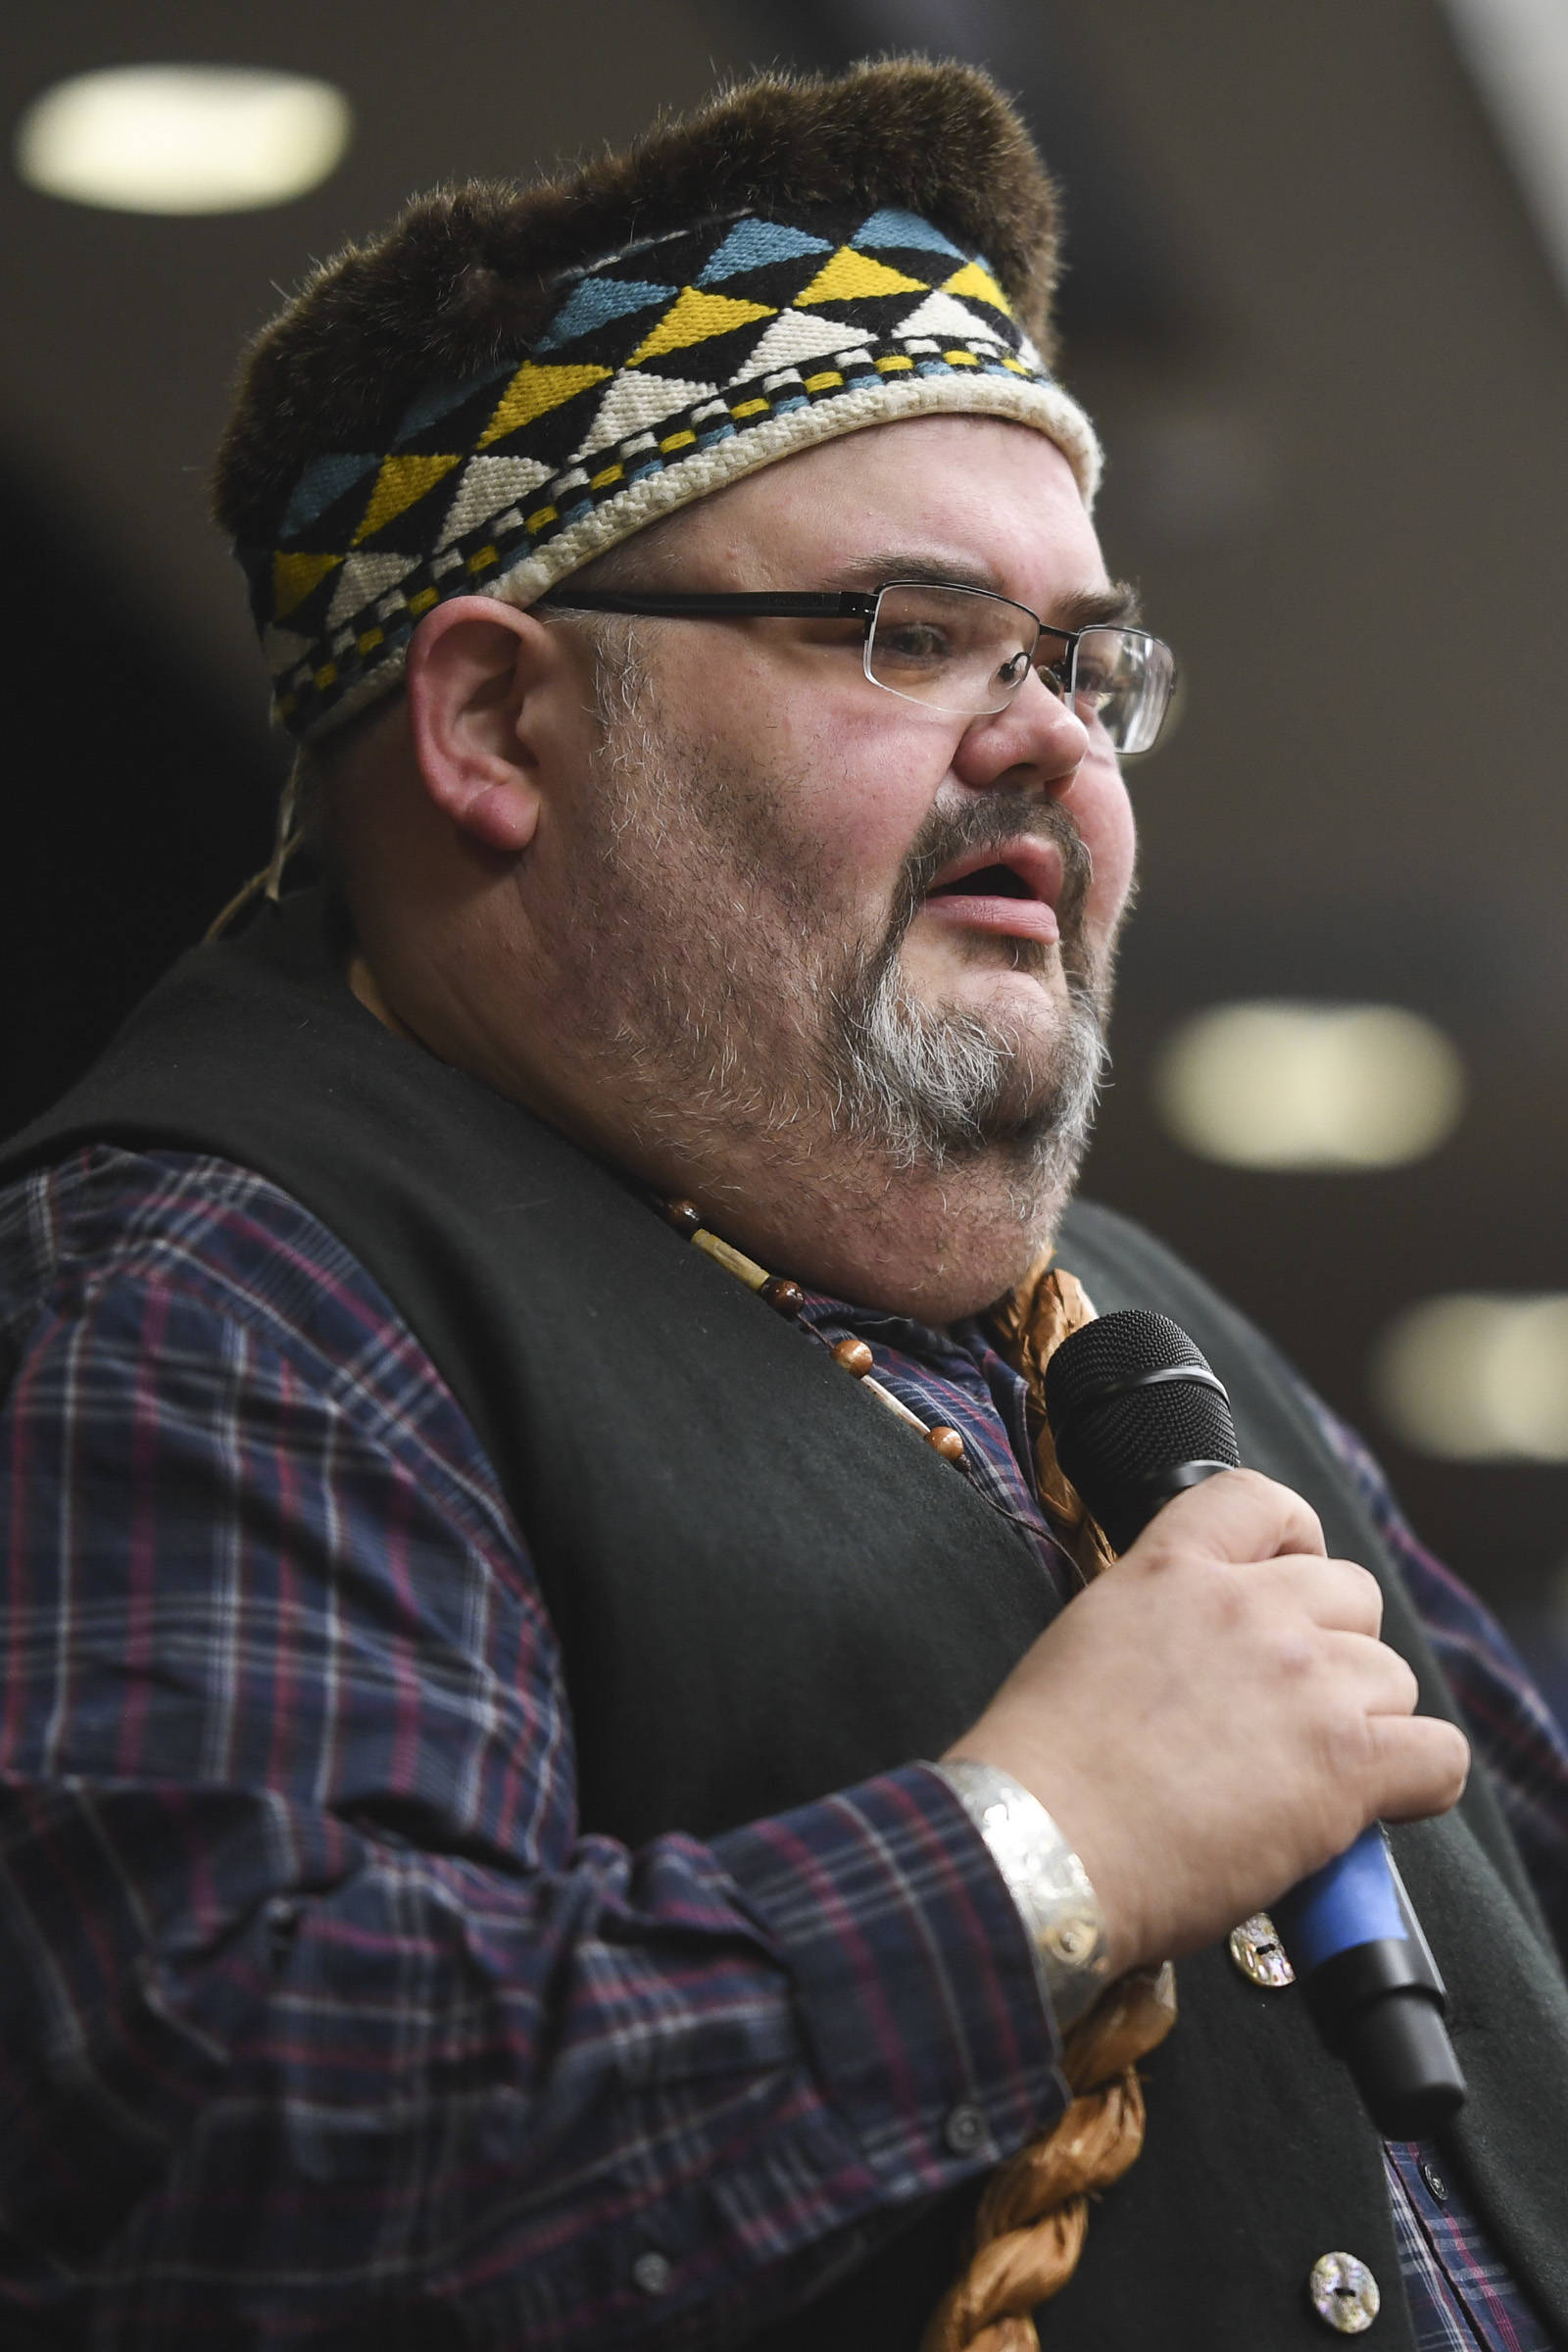 Richard Chalyee Éesh Peterson, President of the Central Council of Tlingit and Haida Indian Tribes of Alaska, speaks during Indigenous Peoples’ Day at the Elizabeth Peratrovich Hall on Monday, Oct. 14, 2019. (Michael Penn | Juneau Empire)